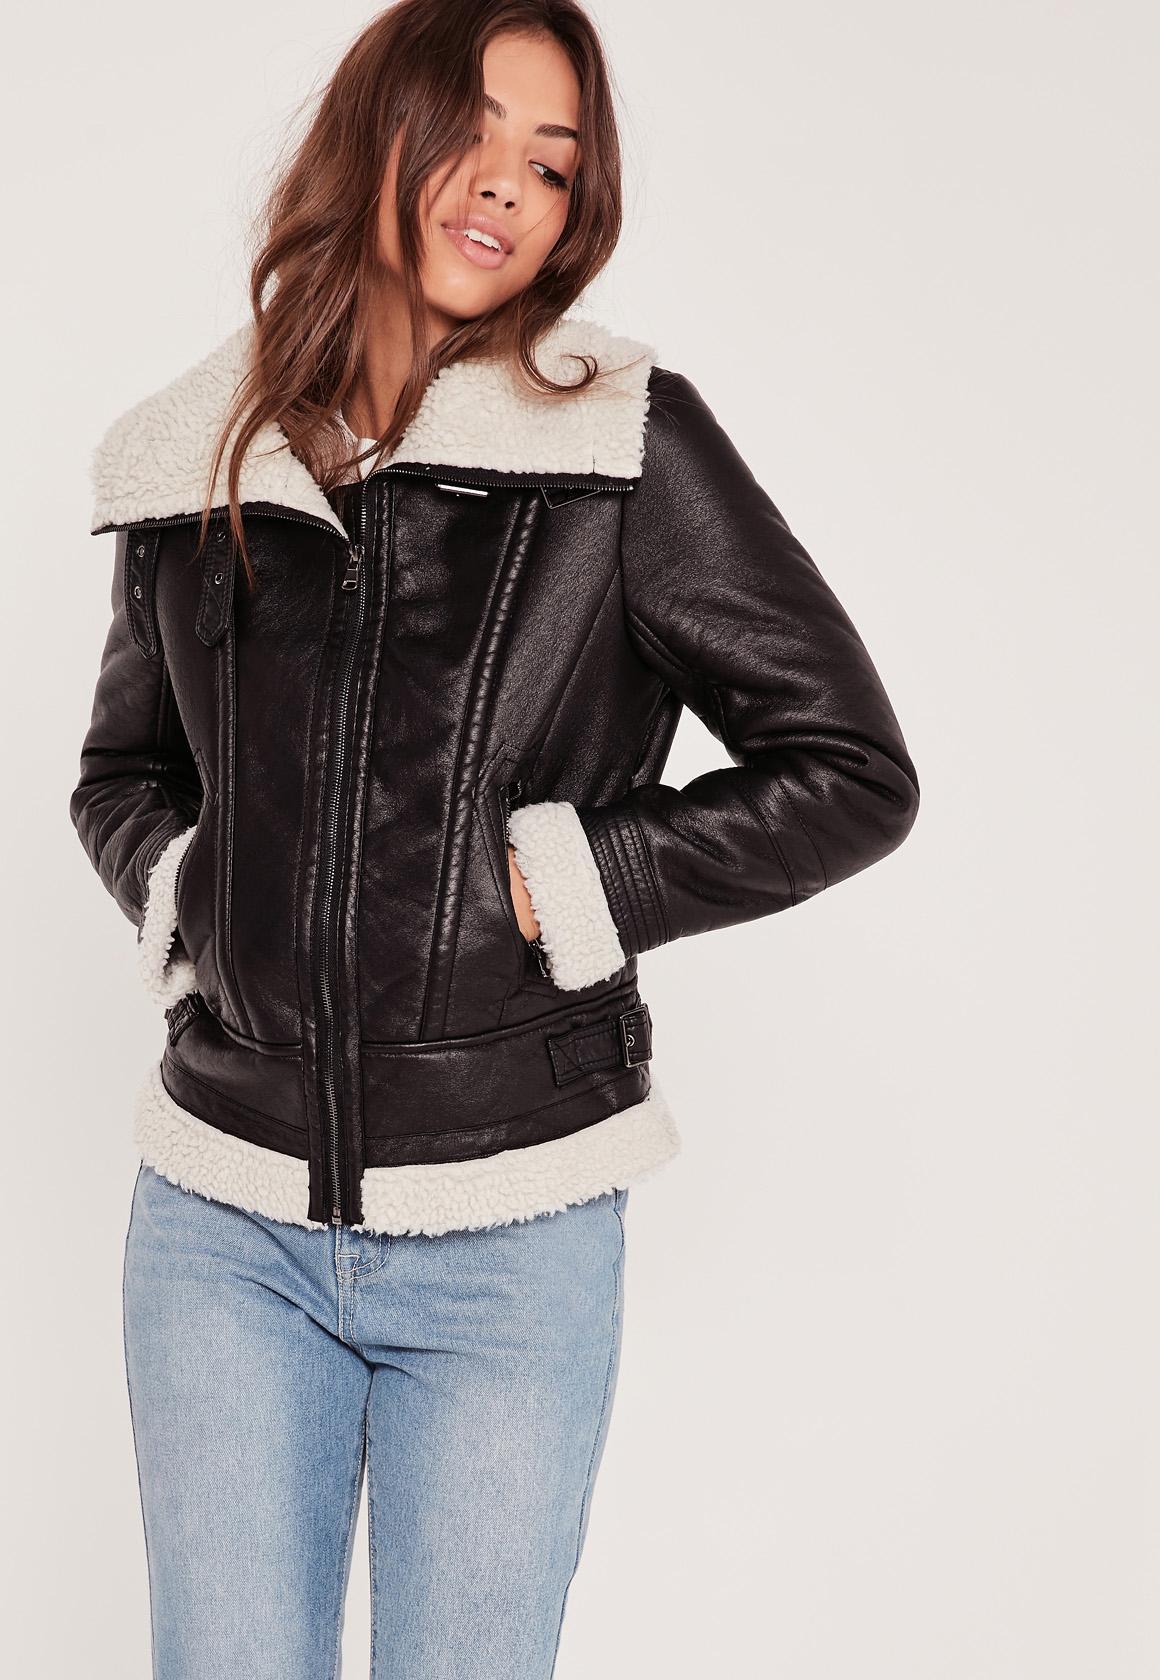 Missguided Black Faux Shearling Leather Look Aviator Pilot Jacket - Lyst